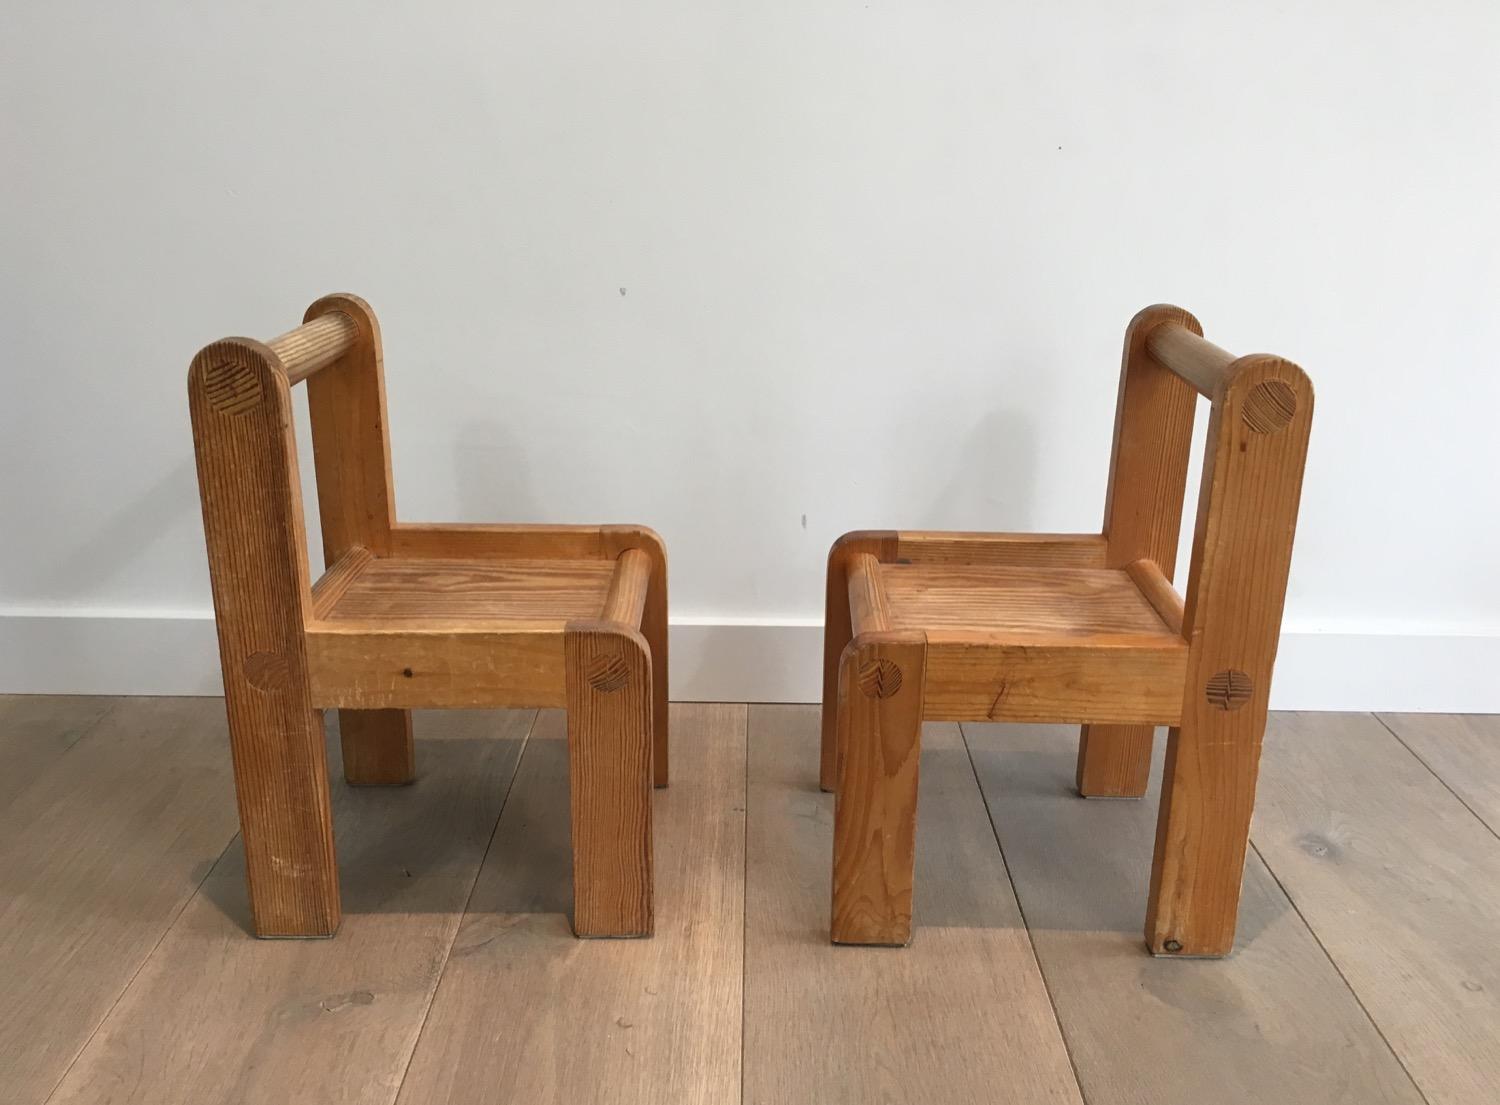 These unusual small baby chairs. This is a nice design, circa 1970.